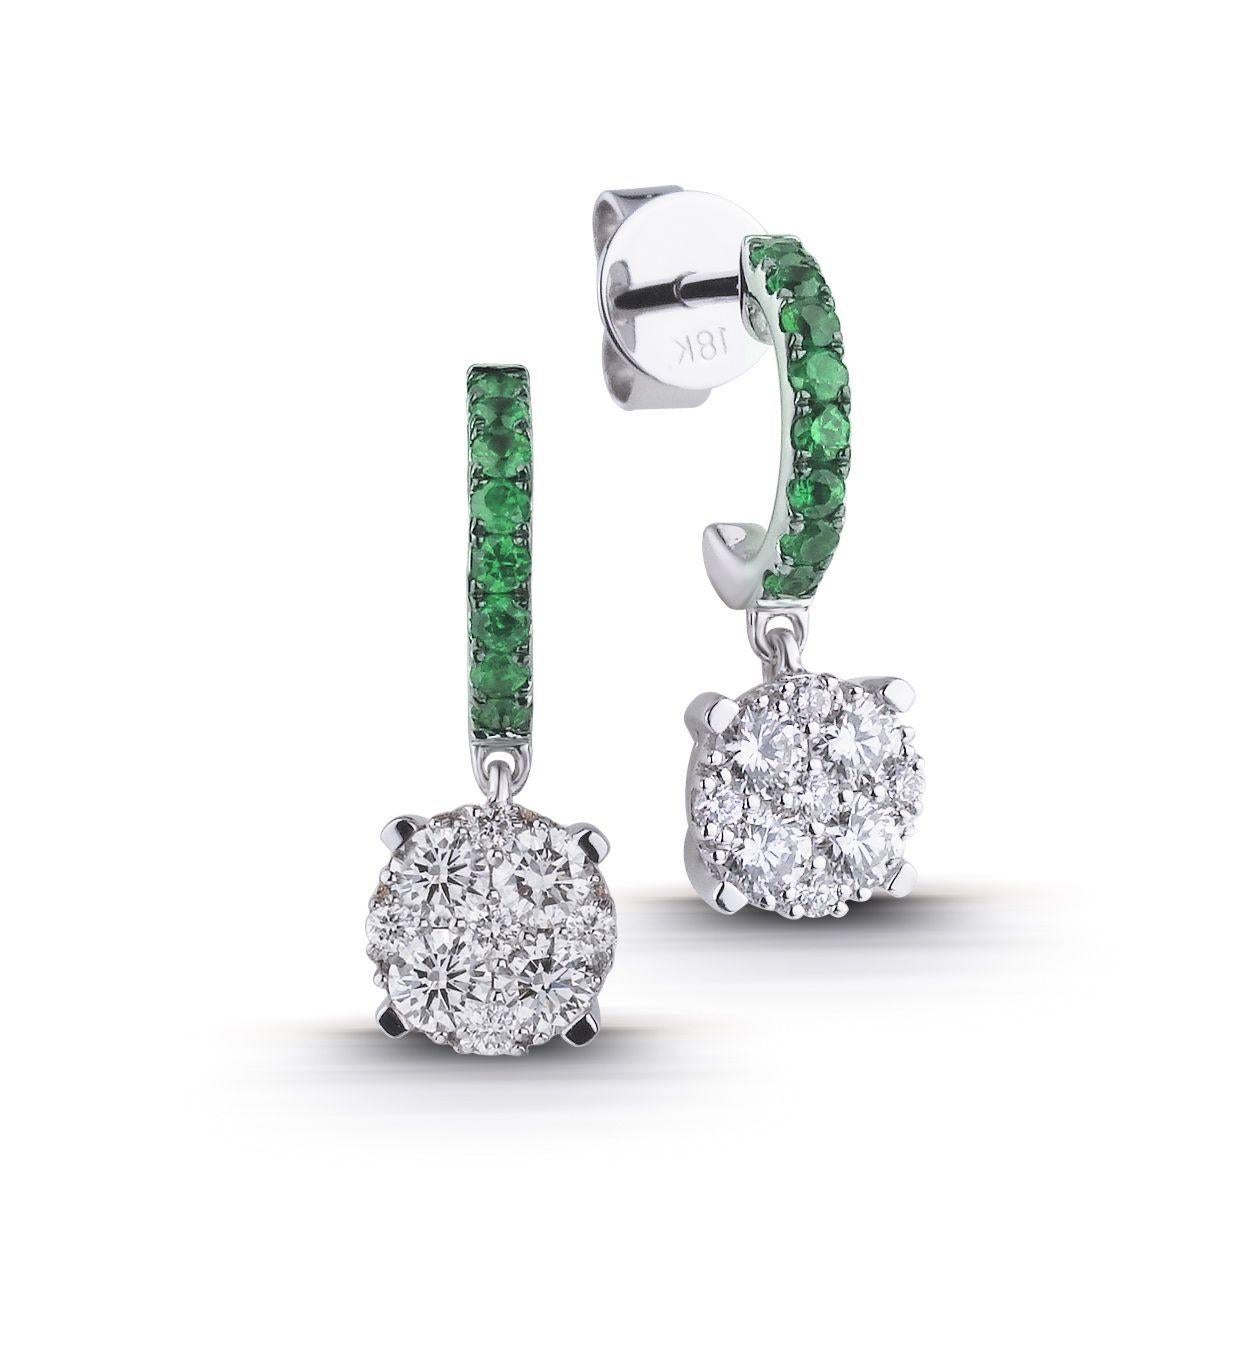 EARRINGS 18K White Gold
Diamond 0.56 Cts/18 Pieces
Emerald 0.24 Cts/16 Pieces

With a heritage of ancient fine Swiss jewelry traditions, NATKINA is a Geneva based jewellery brand, which creates modern jewellery masterpieces suitable for every day